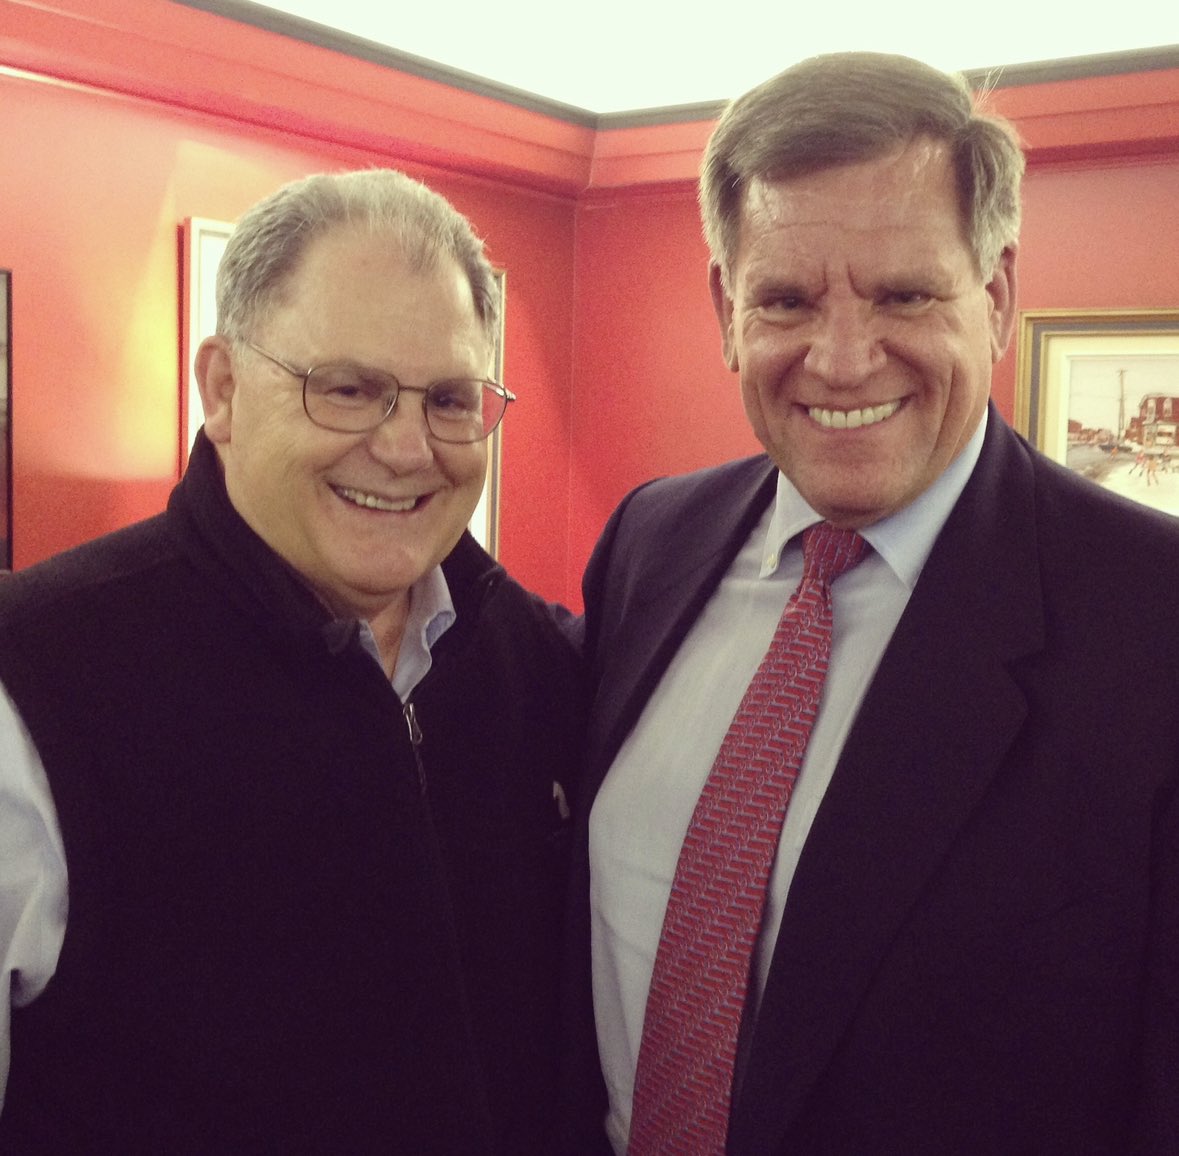 We are deeply saddened to learn of the passing of an industry friend and partner, Rockwell “Rocky” Wirtz. Your heartwarming smile and larger than life persona will be dearly missed. #restinpeace